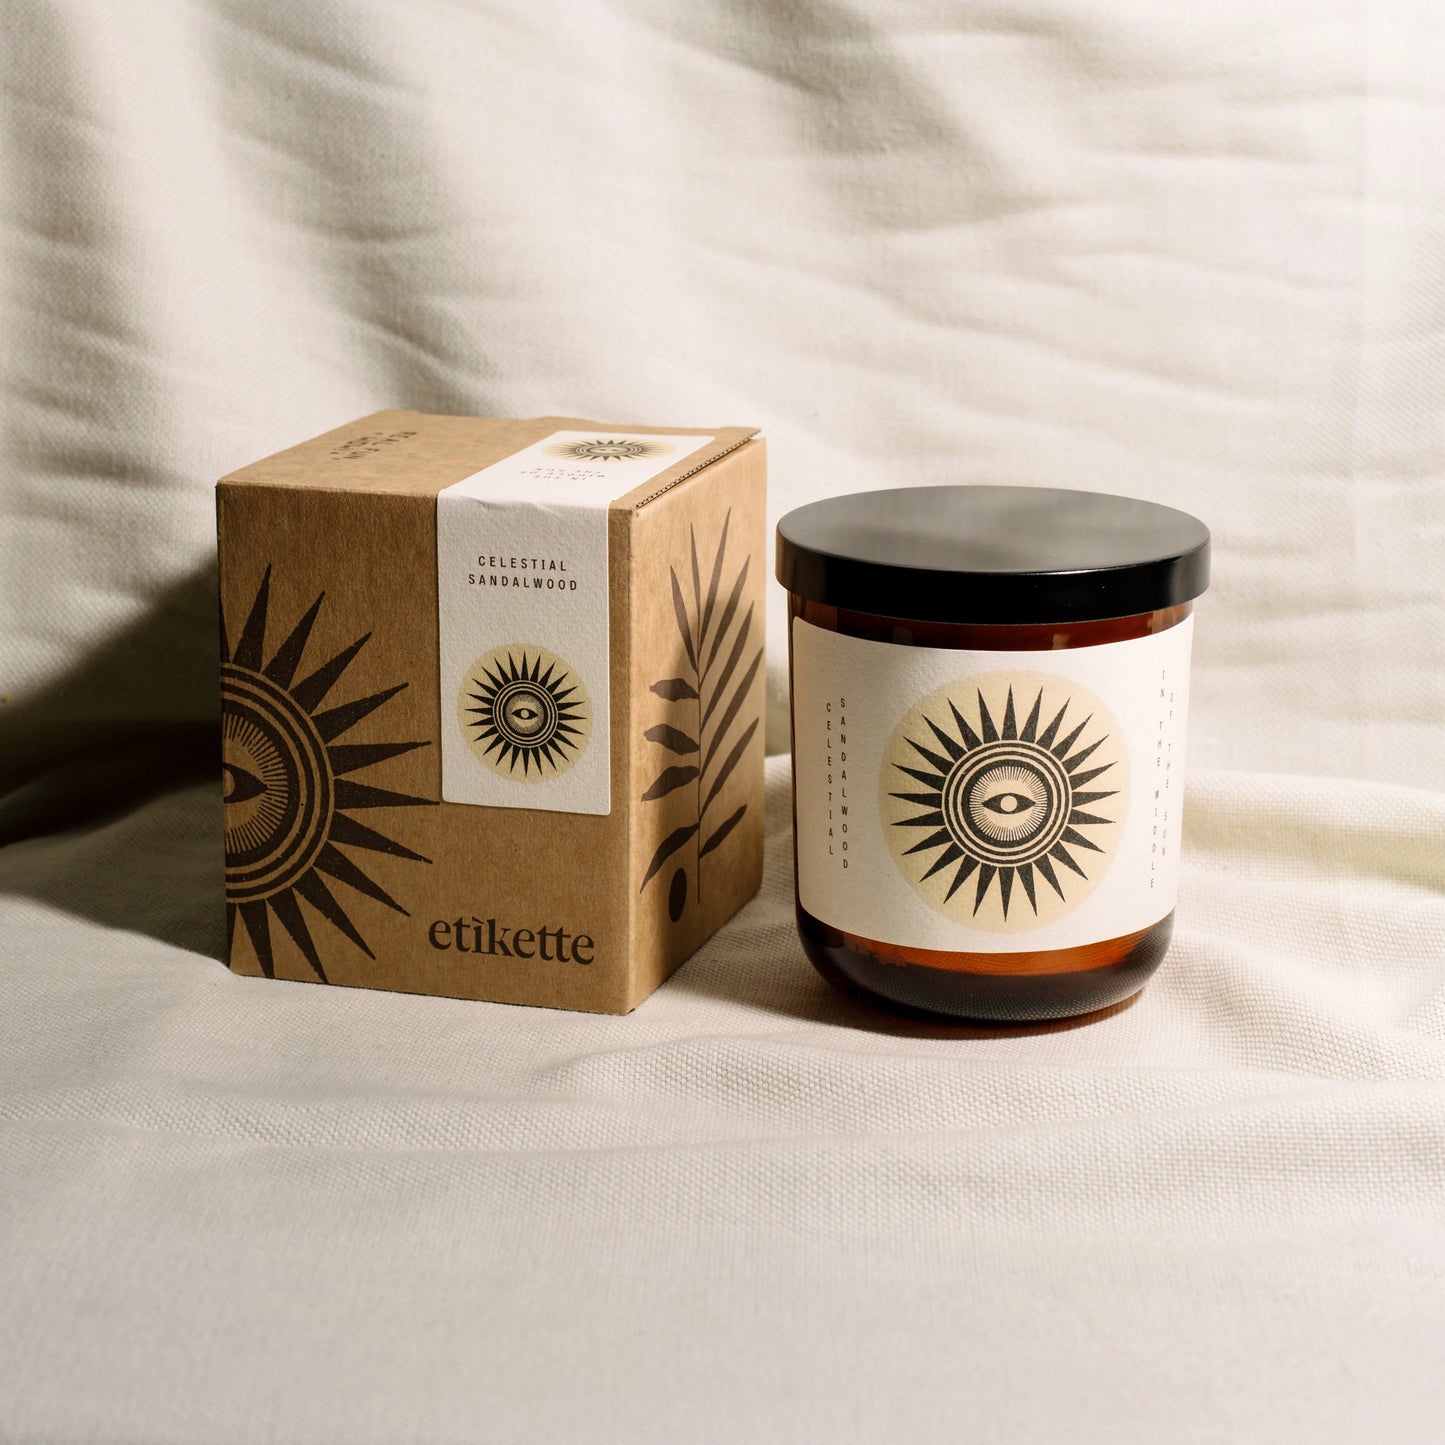 Etikette Real Fun Wow Candle - The Middle Of The Sun - Sandalwood